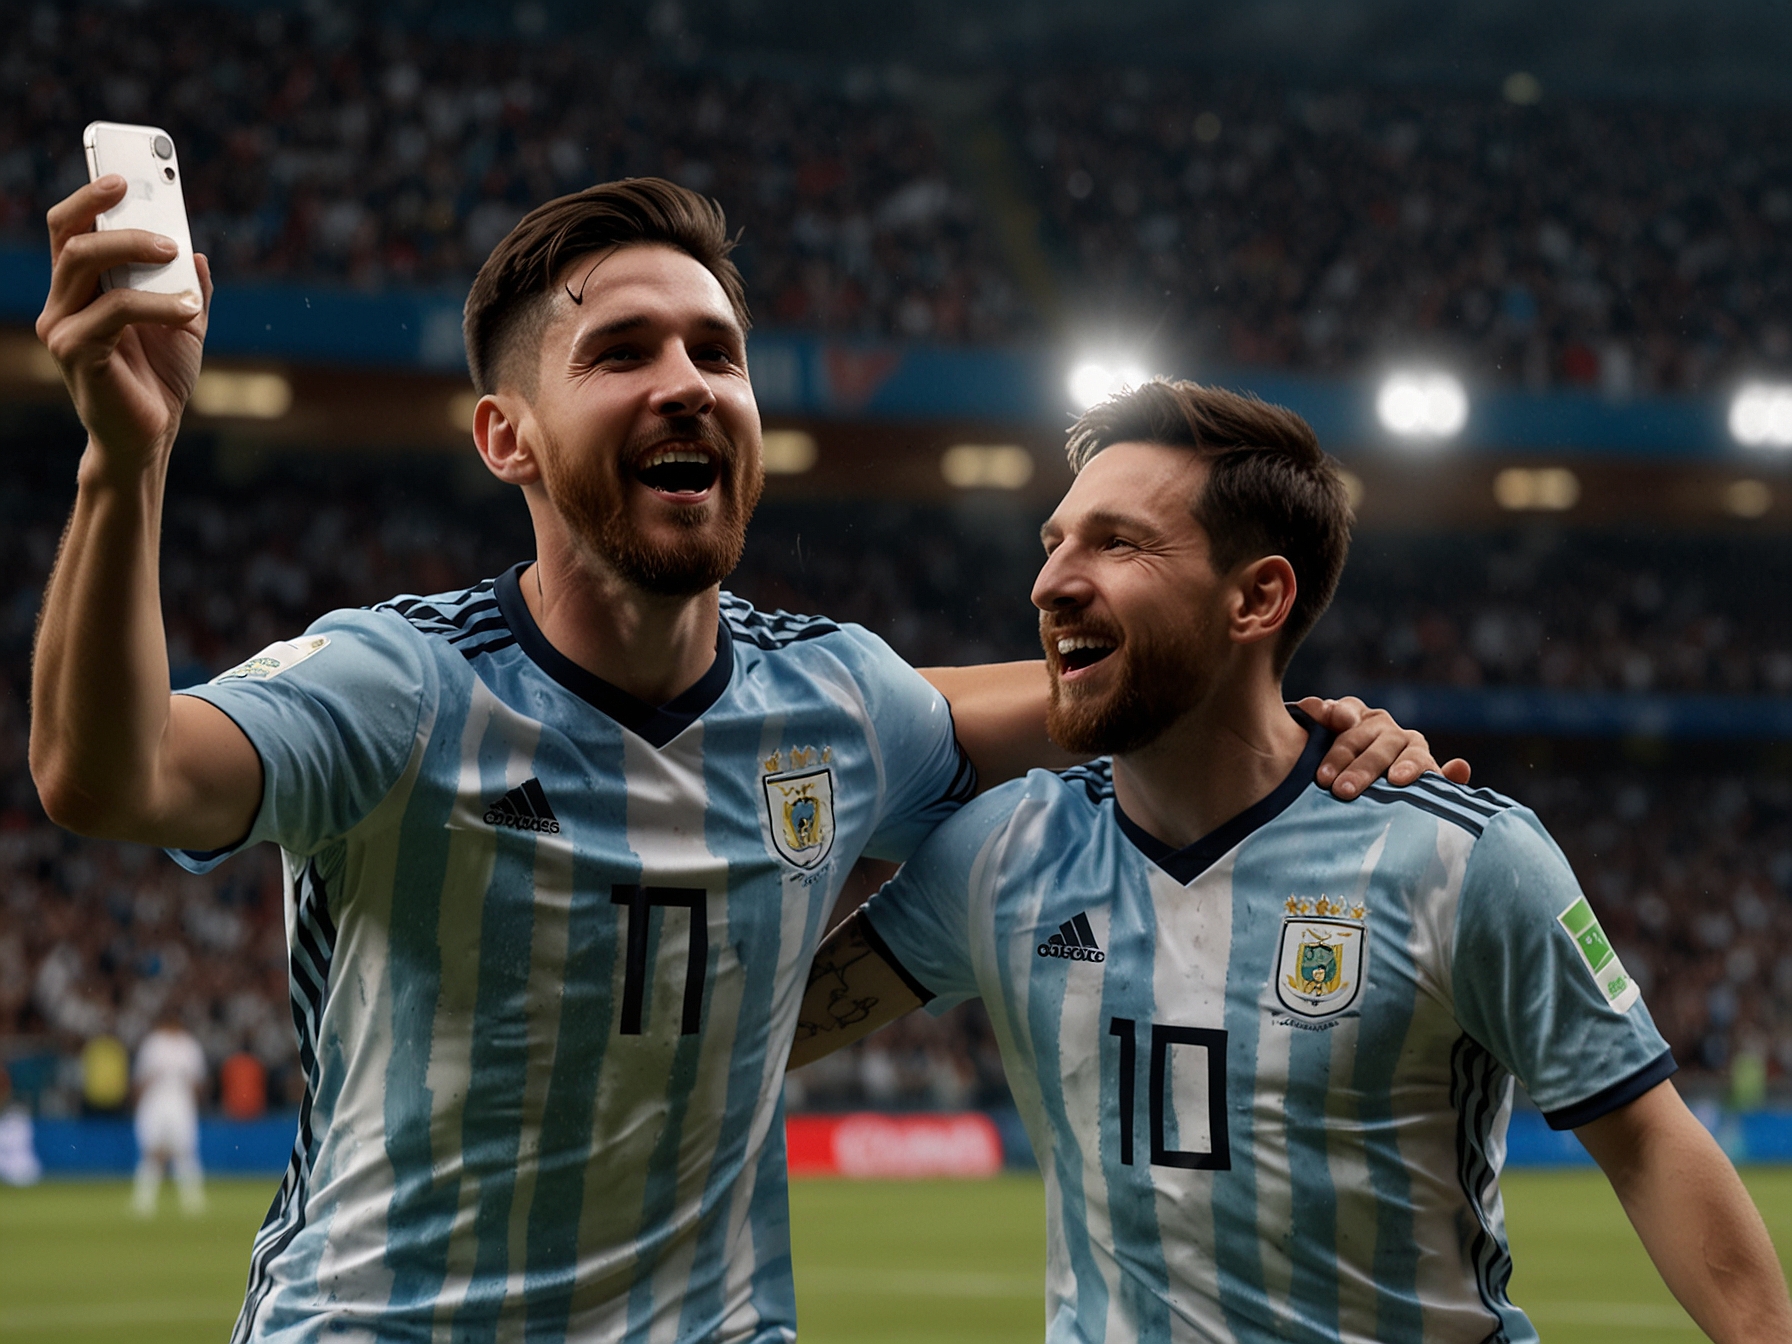 Julian Alvarez celebrates after scoring Argentina's first goal in their 2-0 victory over Canada, with Lionel Messi's playmaking abilities highlighted in their opening match of Copa America 2024.